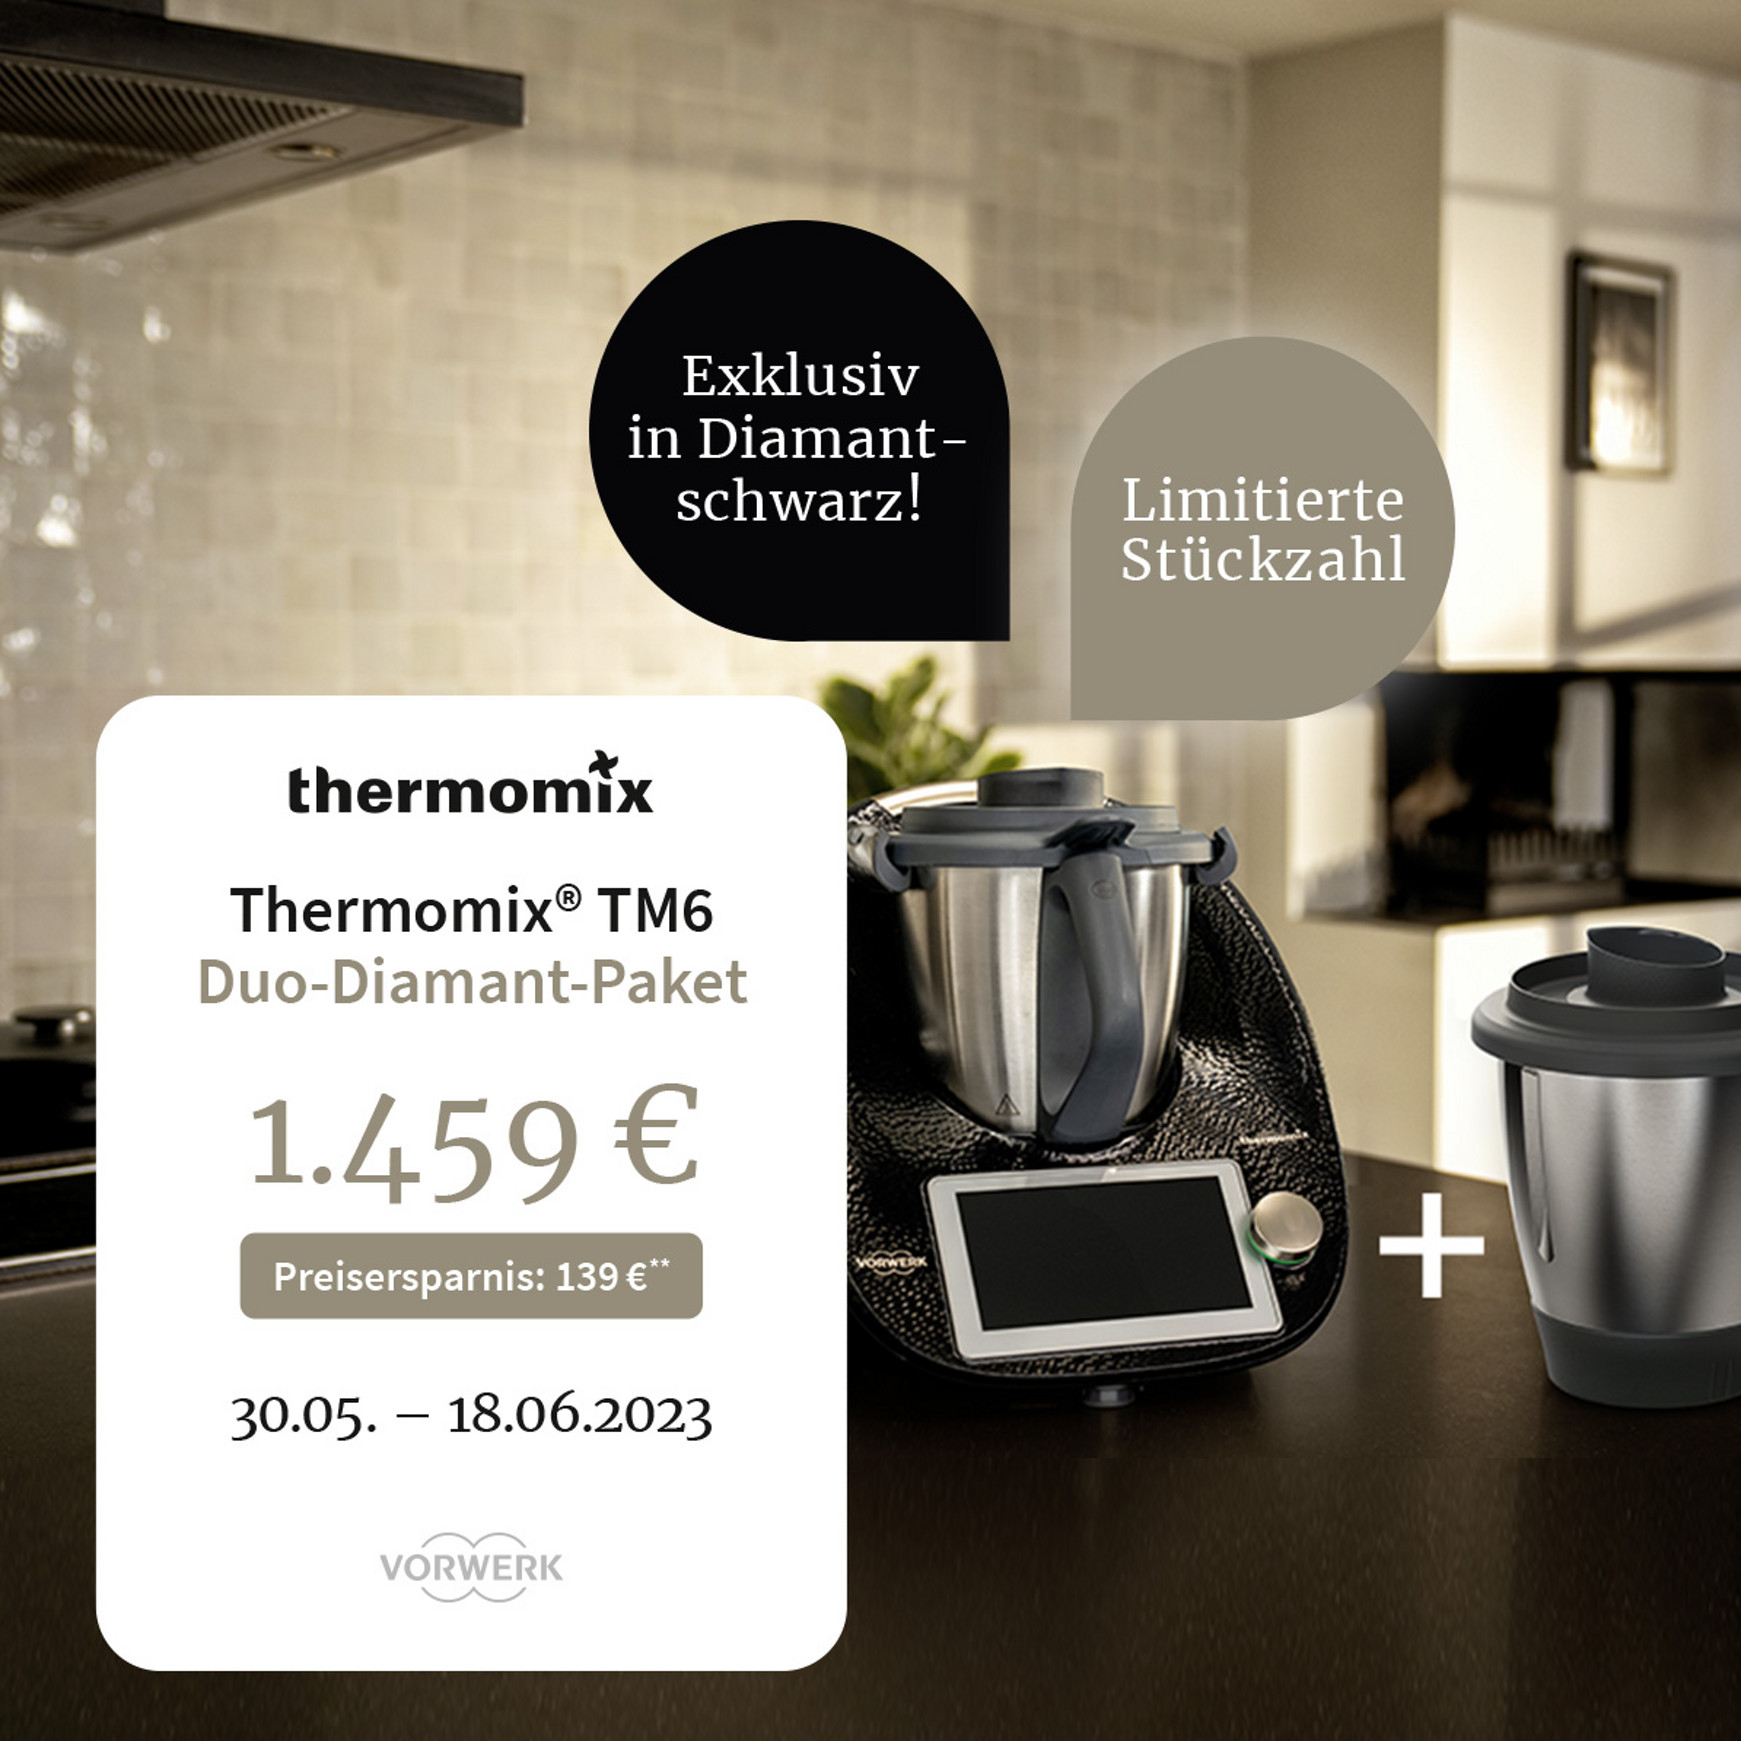 thermomix Website Aktuelle Angebote Teaser 1200x1200